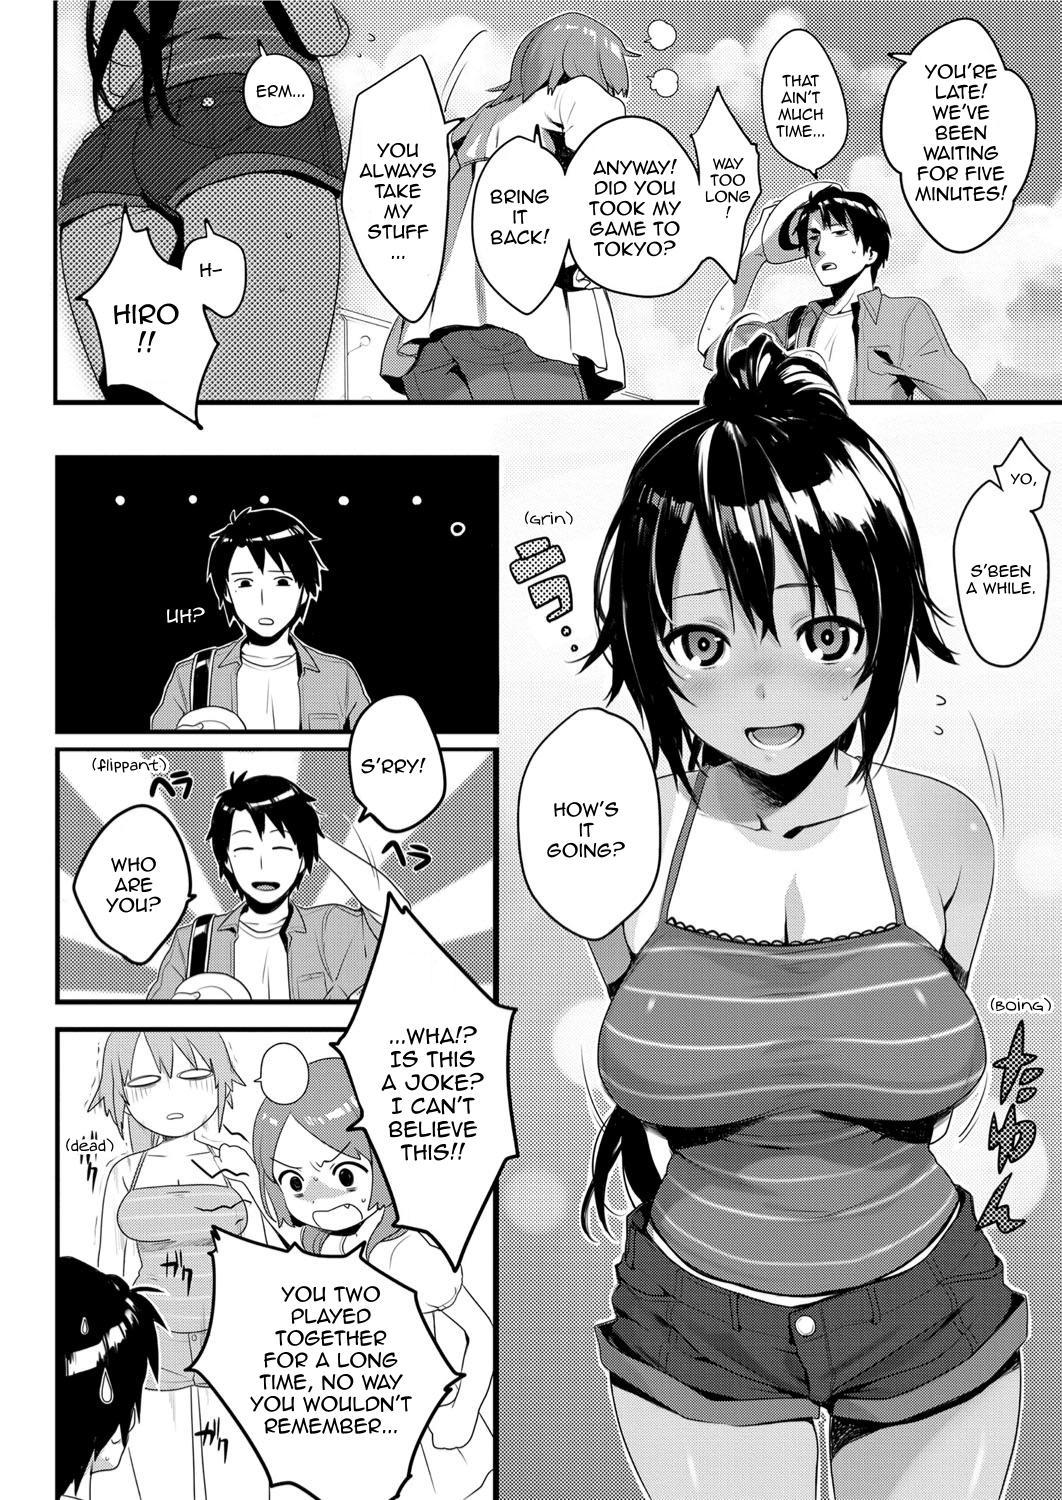 Cuck Umi no Mieru Ie | The Place Where I Met Umi Double Penetration - Page 2